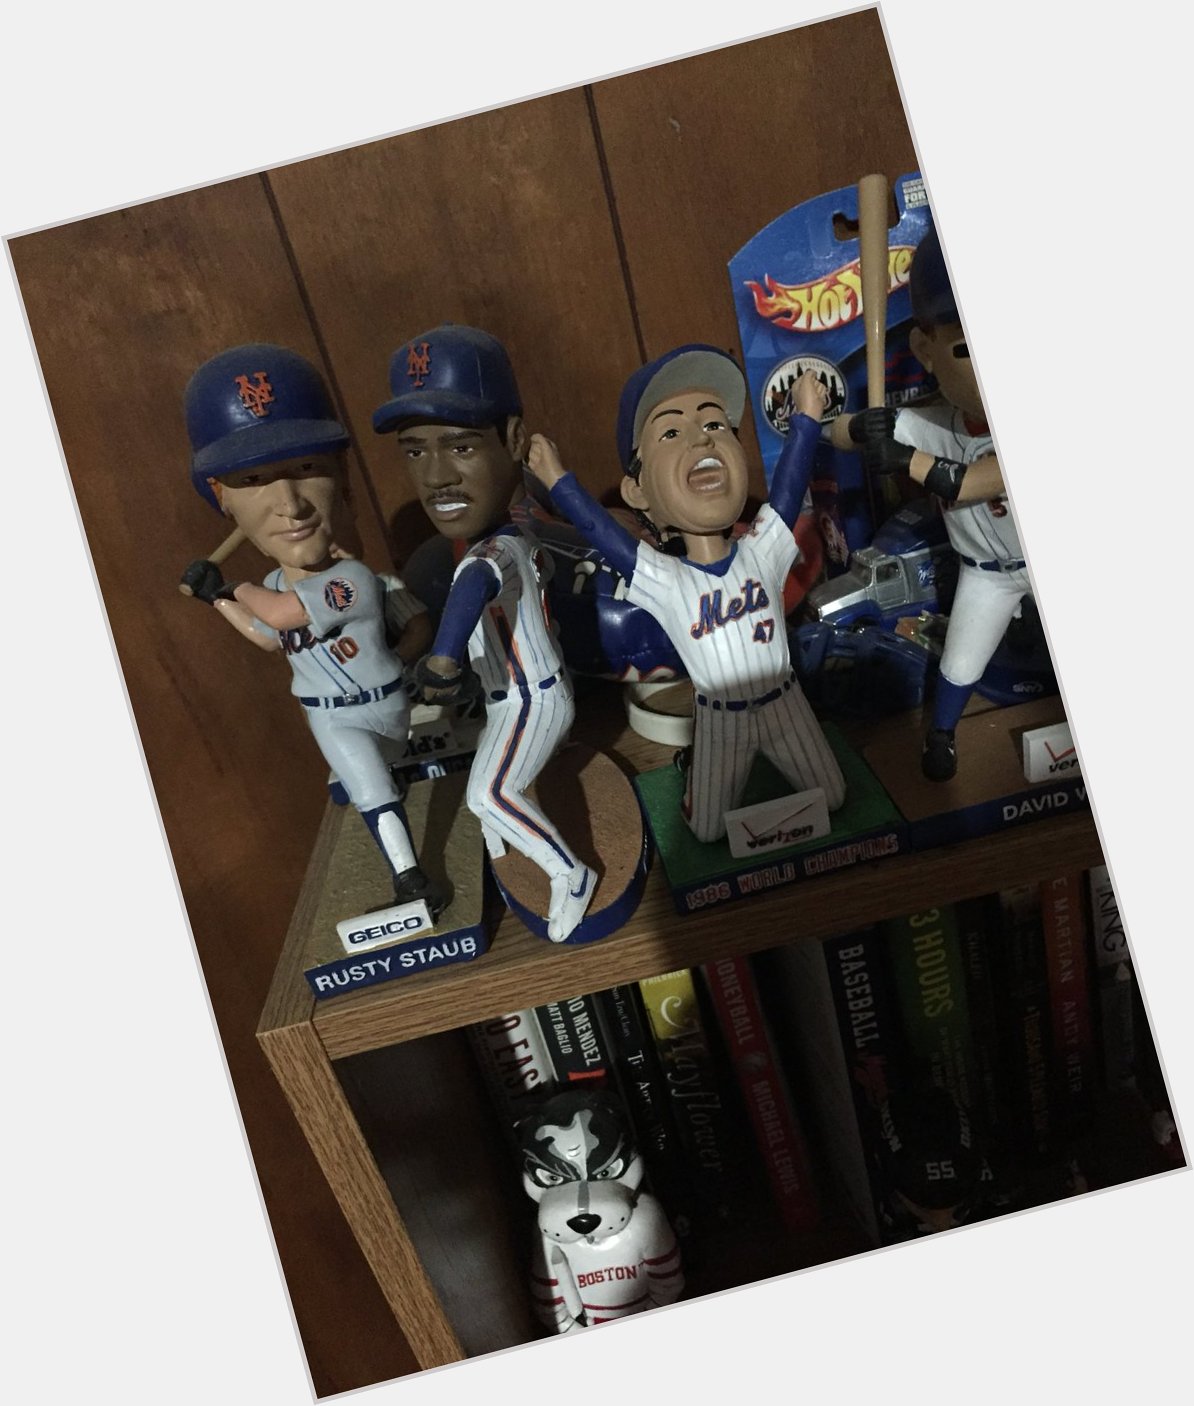 Happy birthday to Dwight Gooden, who owns a special place in my bobblehead collection 